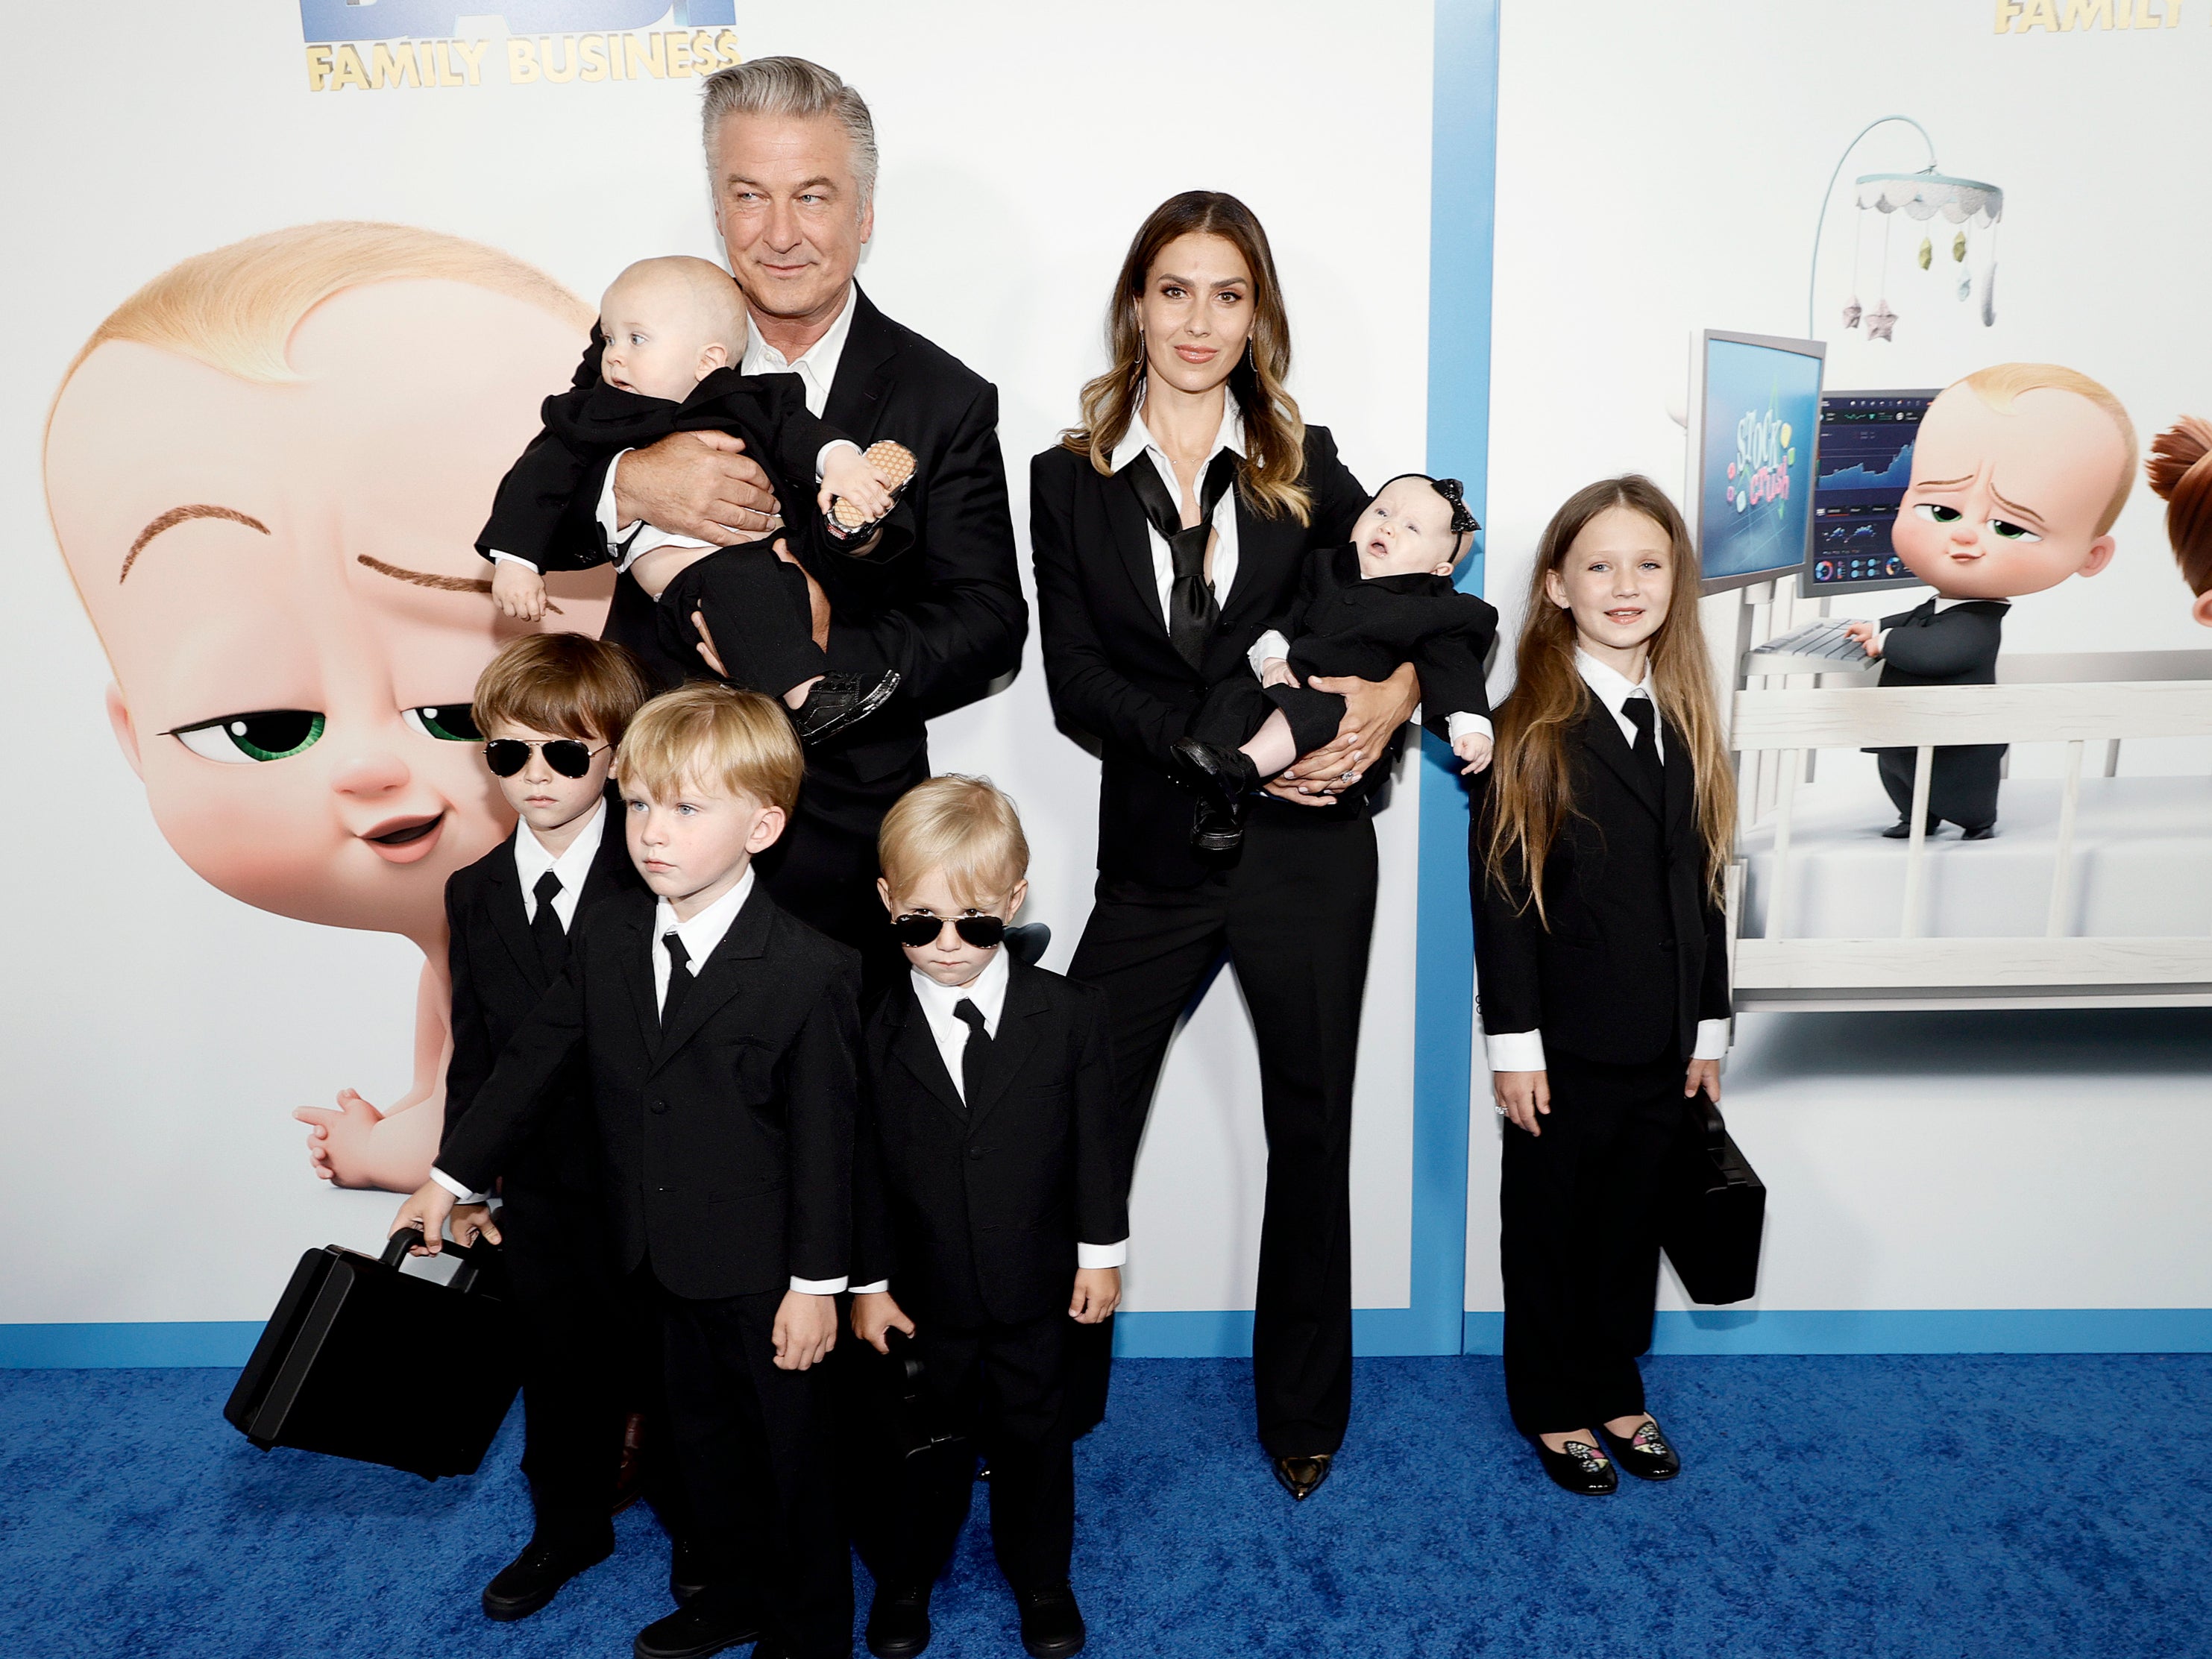 Alec Baldwin, Hilaria Baldwin and their six children at ‘The Boss Baby: Family Business' premiere